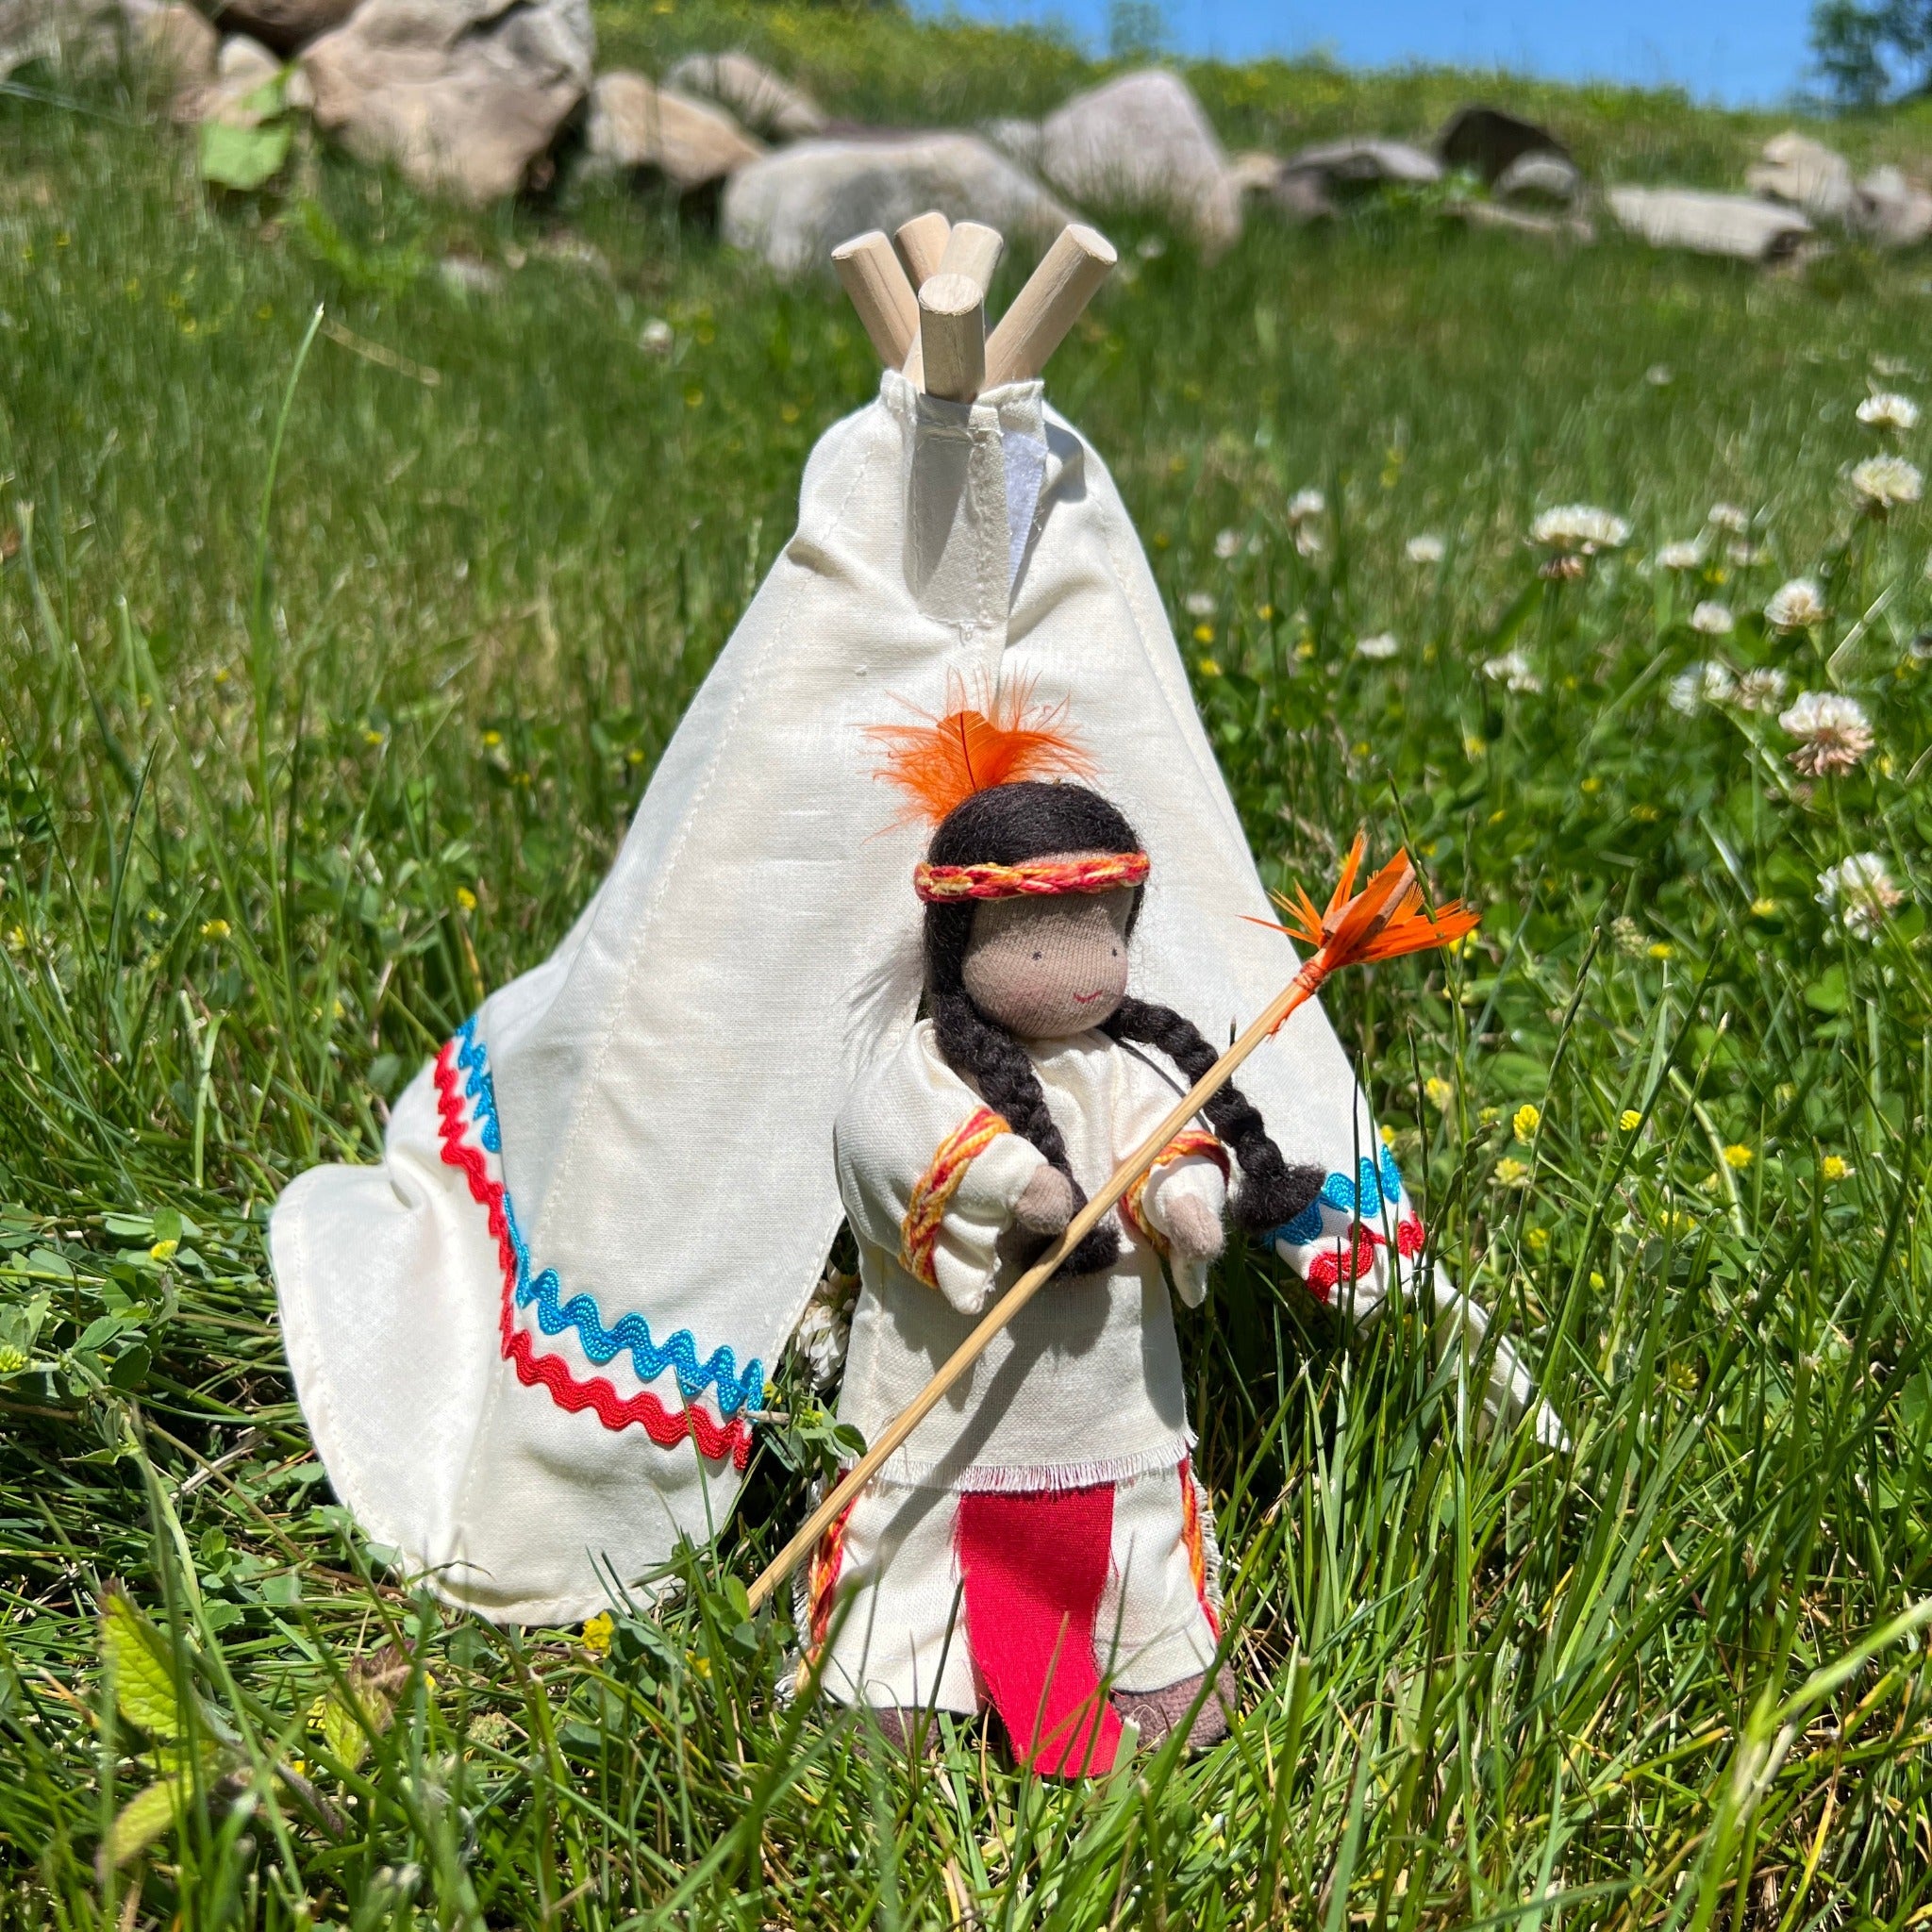 Waldorf dolls-Native American Family set and family